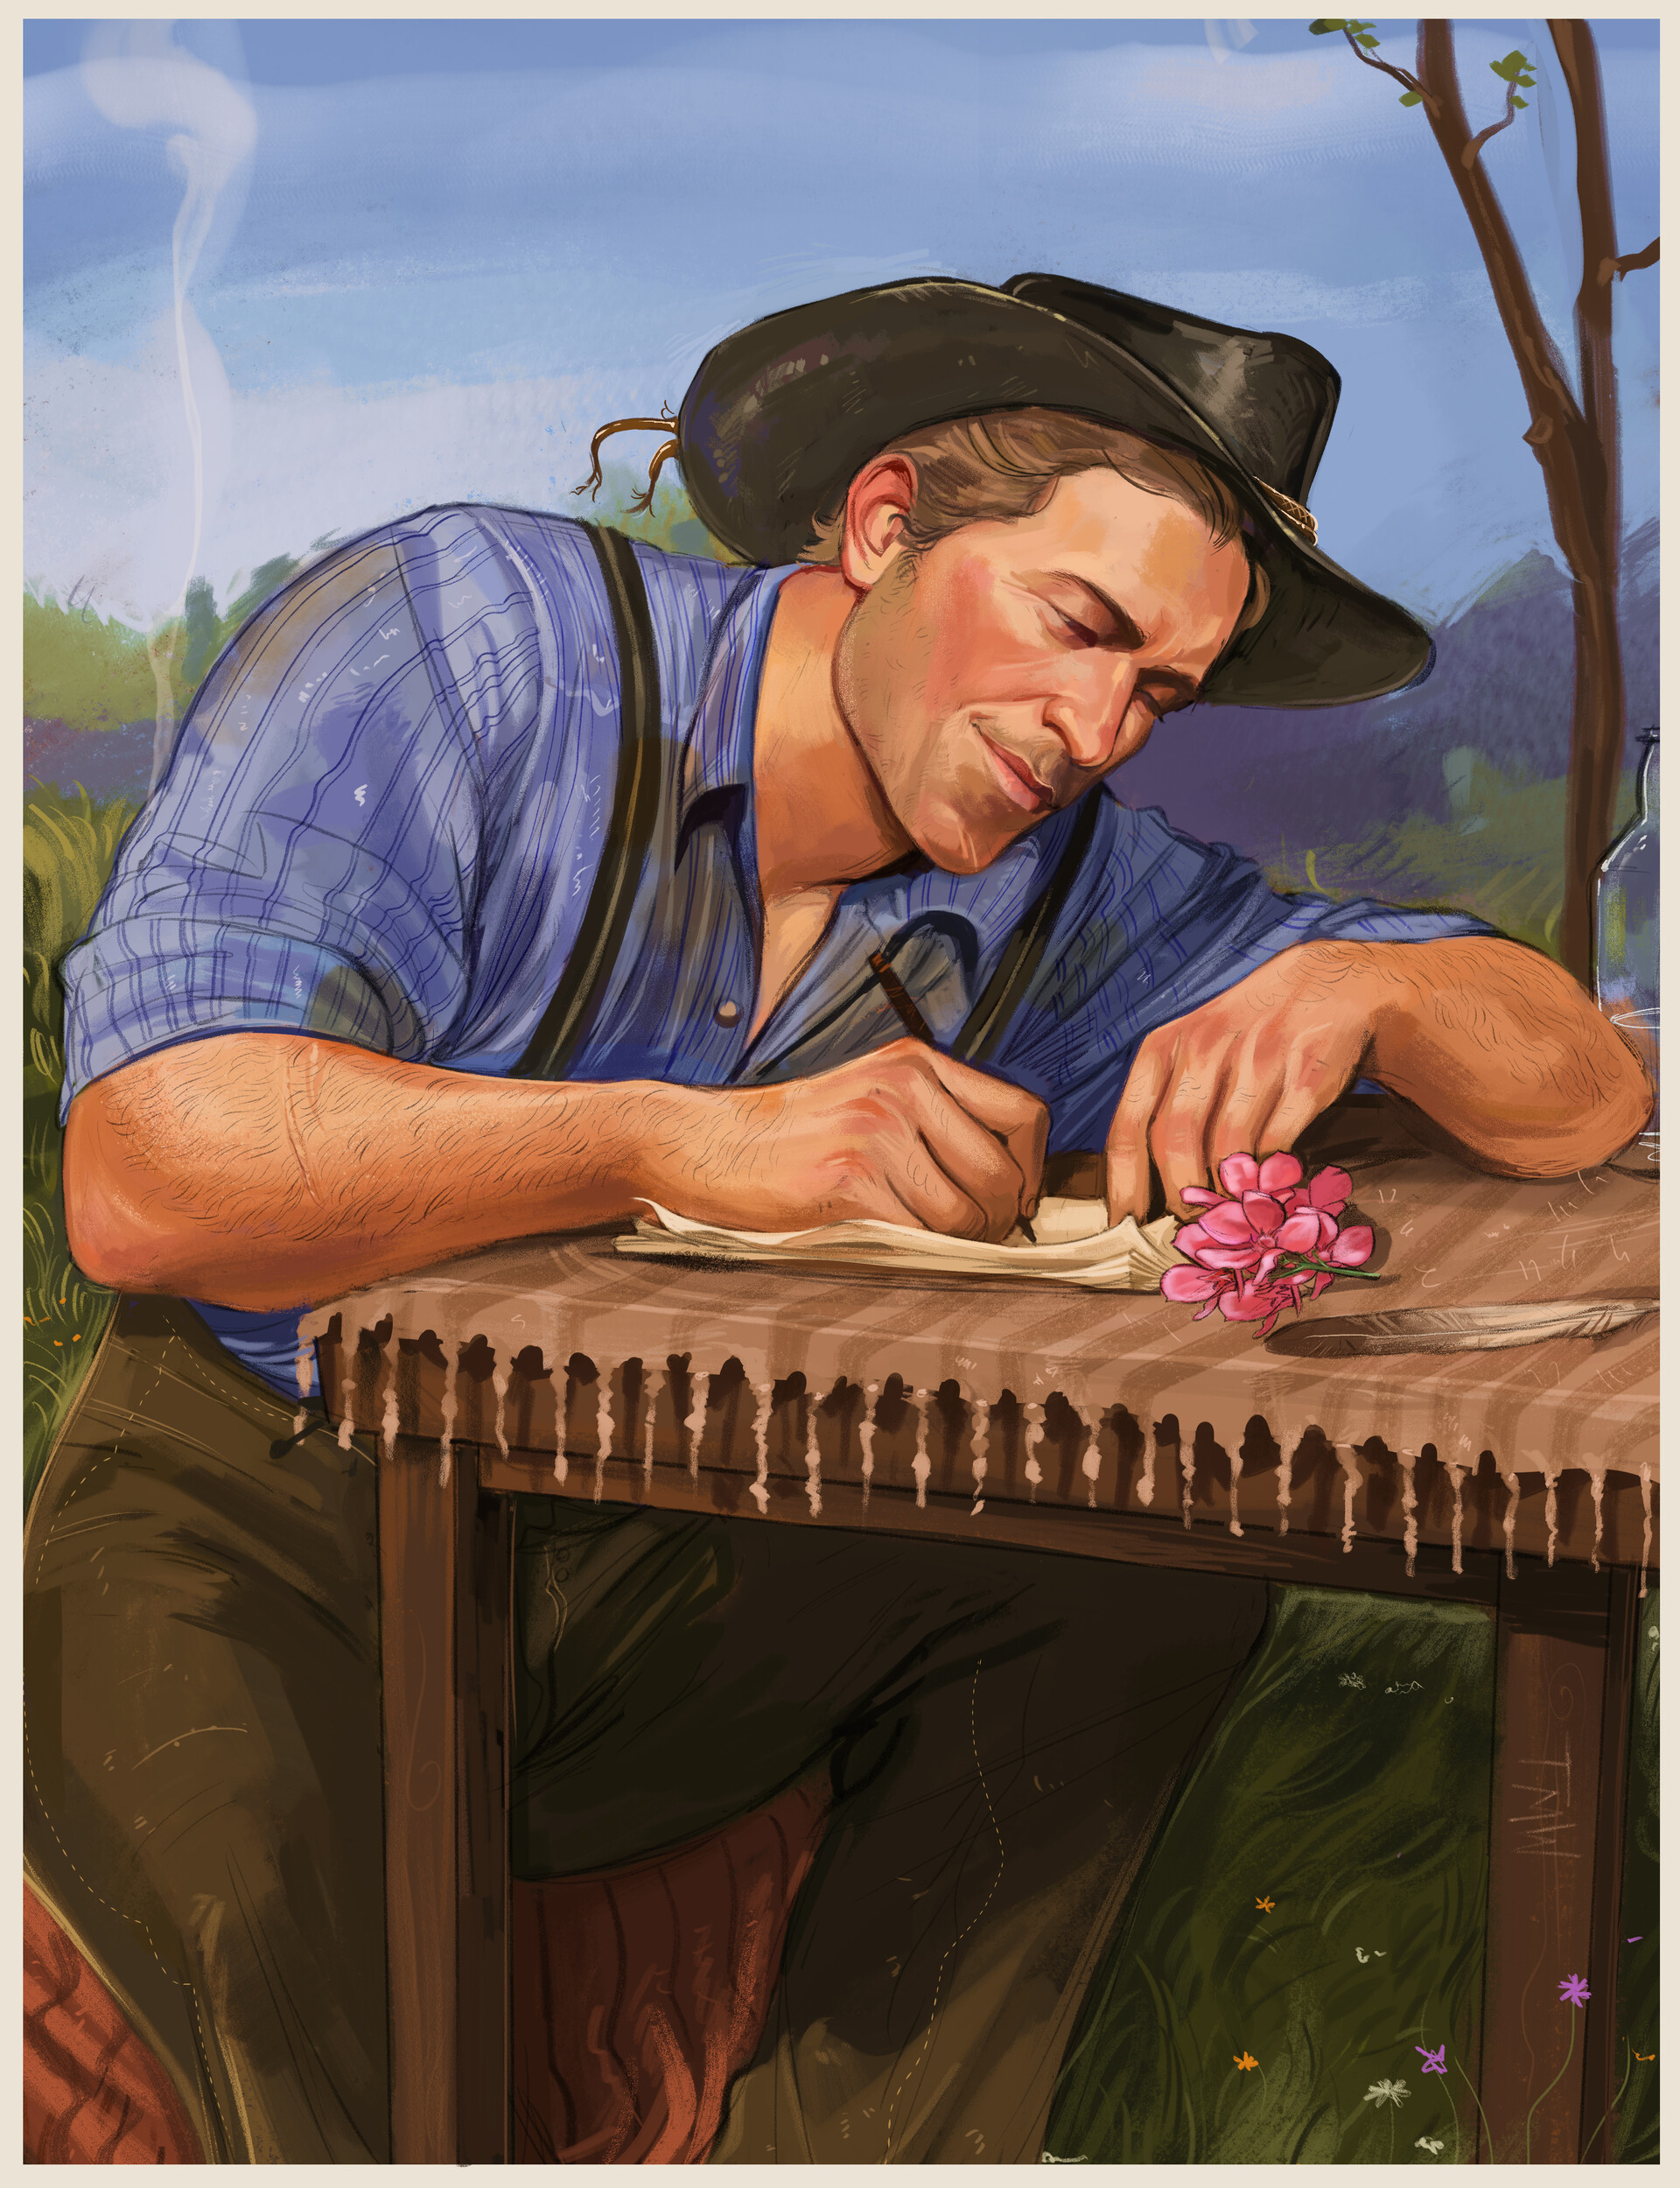 A commission of Arthur Morgan writing in his journal.